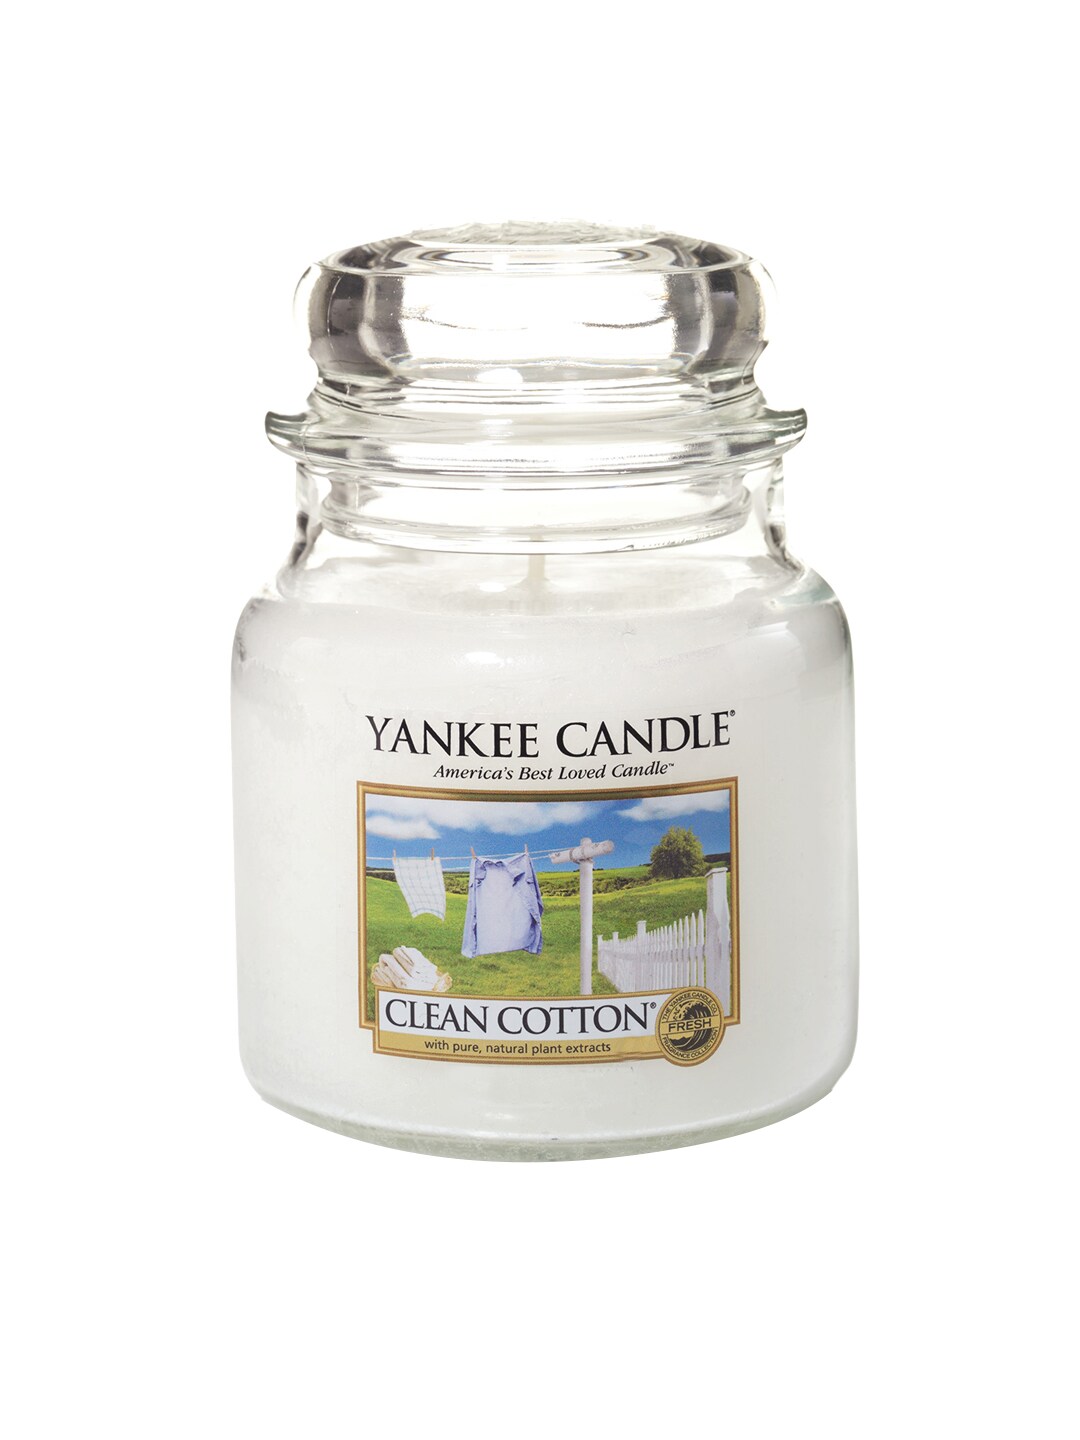 YANKEE CANDLE White Classic Medium Jar Clean Cotton Scented Candles Price in India